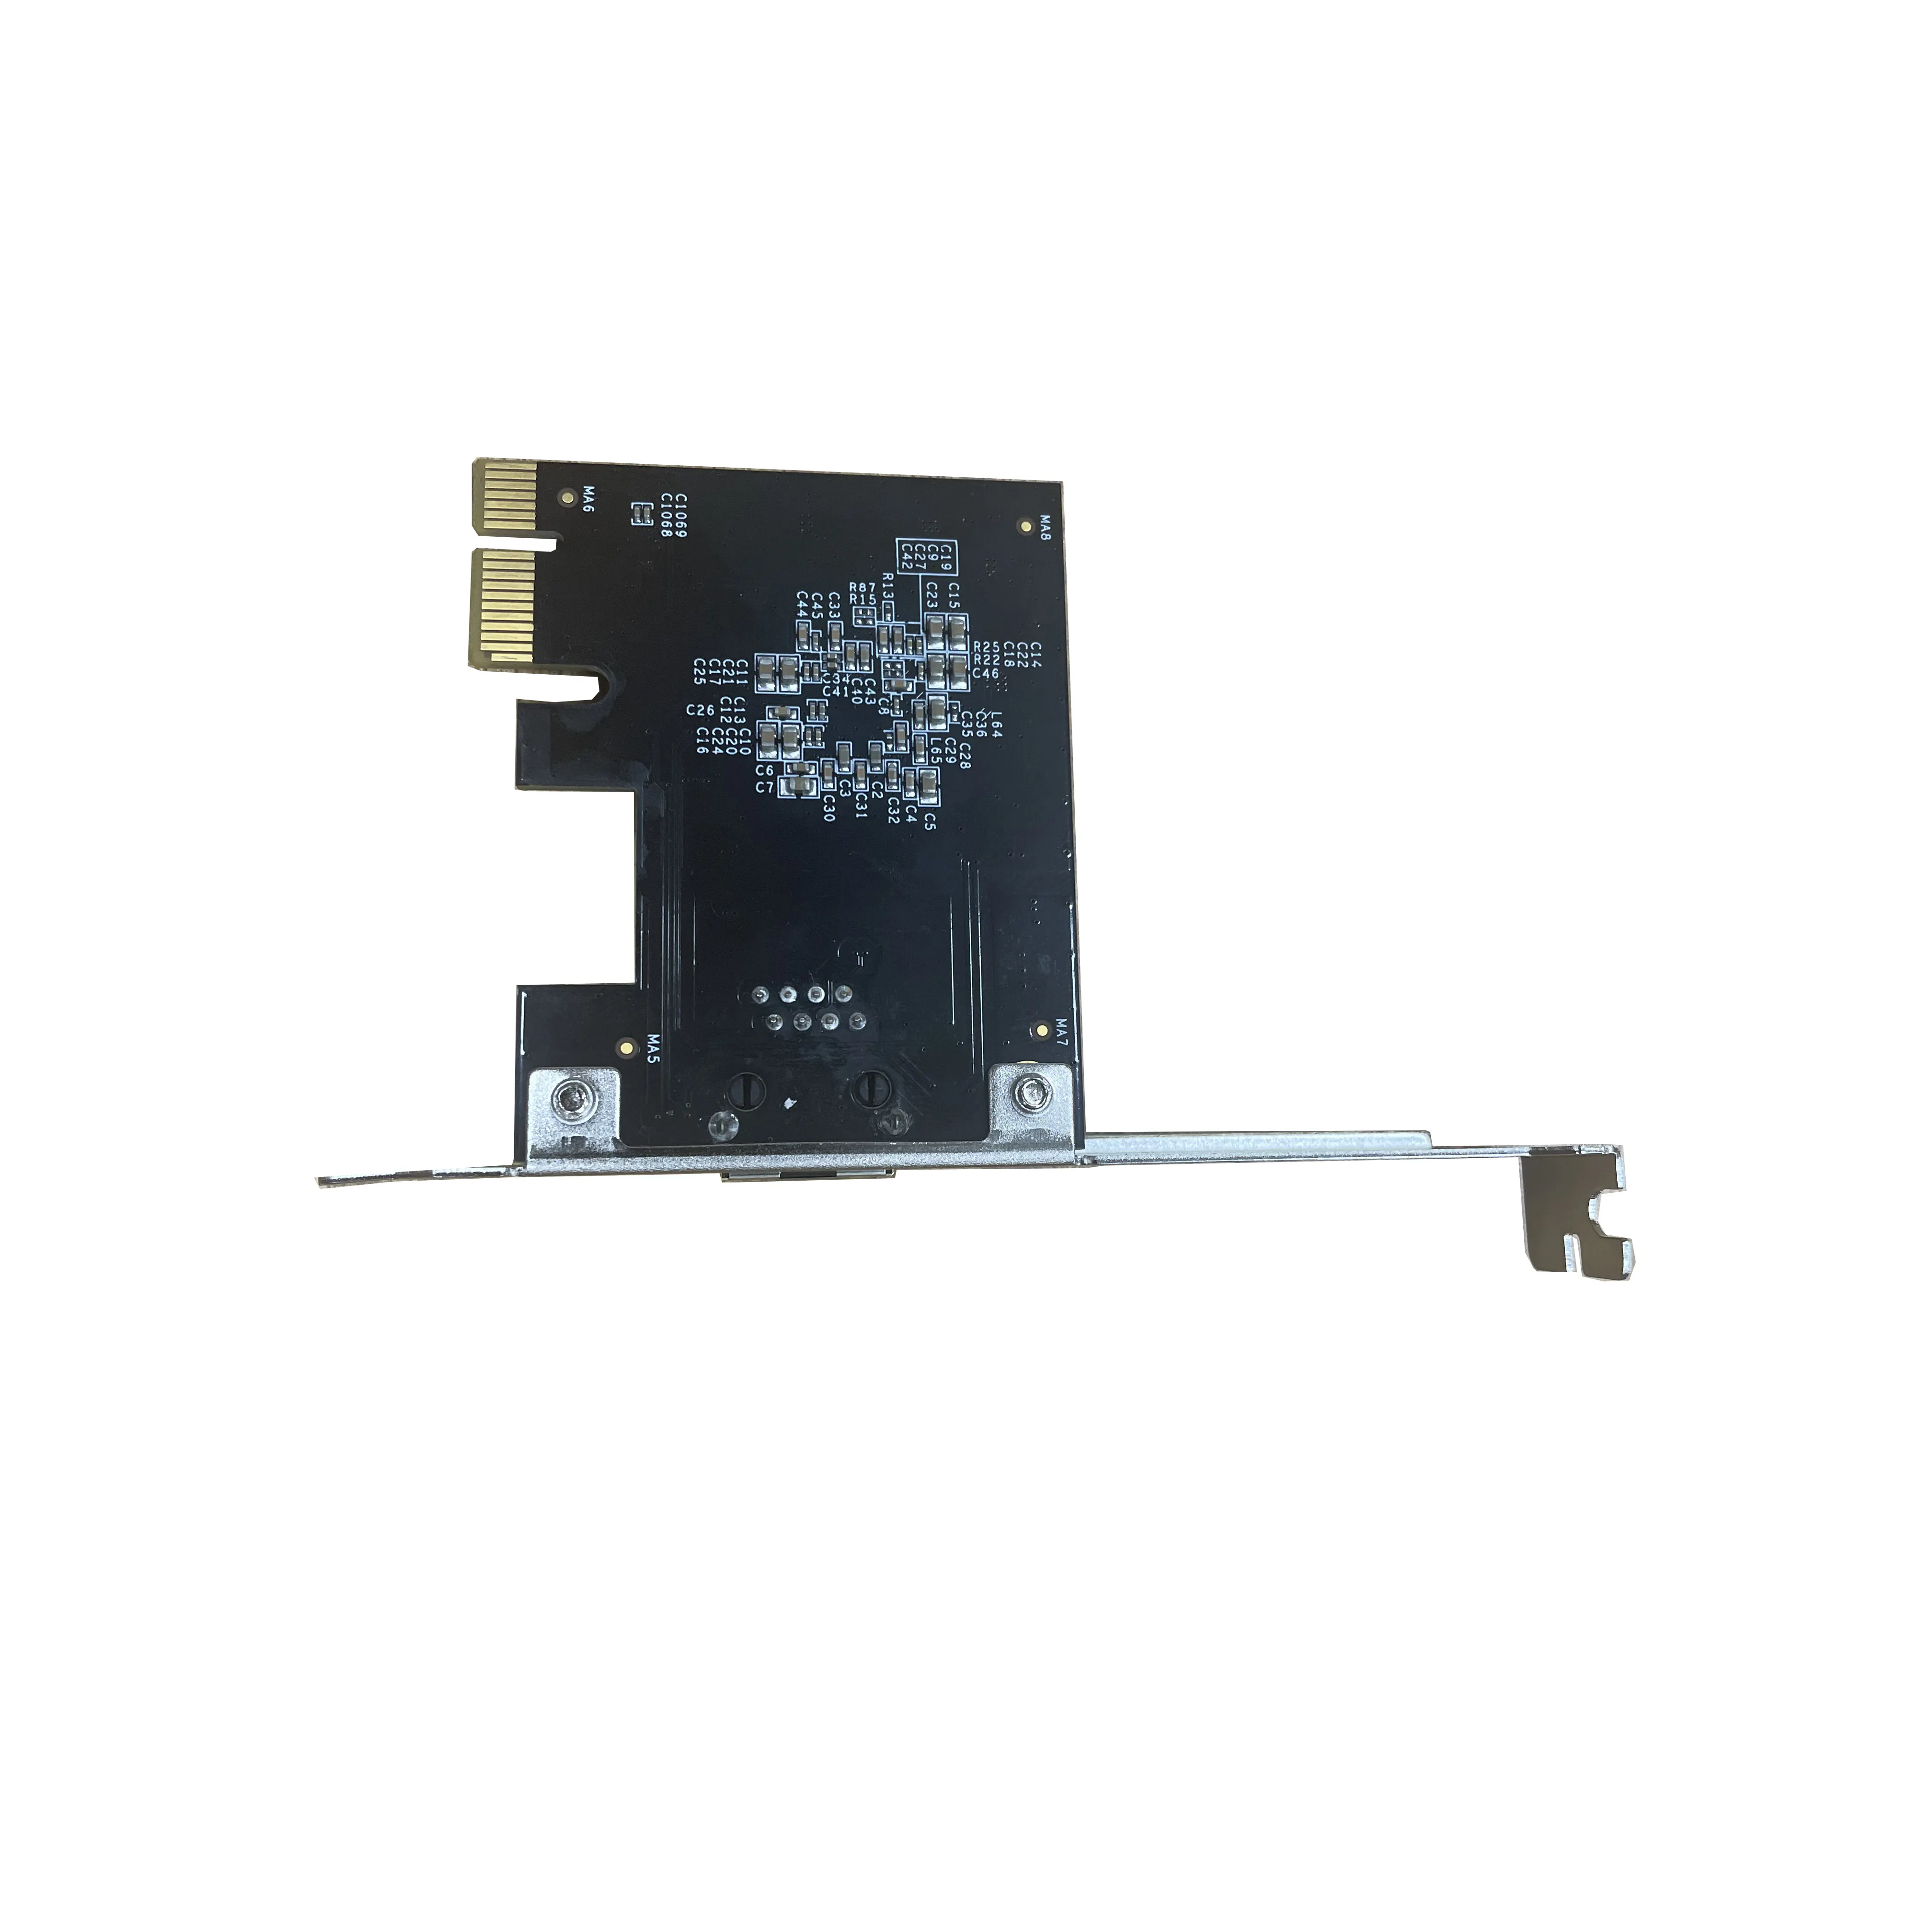 PCIe In-PT-T5G Single 5GbE SFP Optical Fiber Network Card Adapter High-Speed Ethernet Card